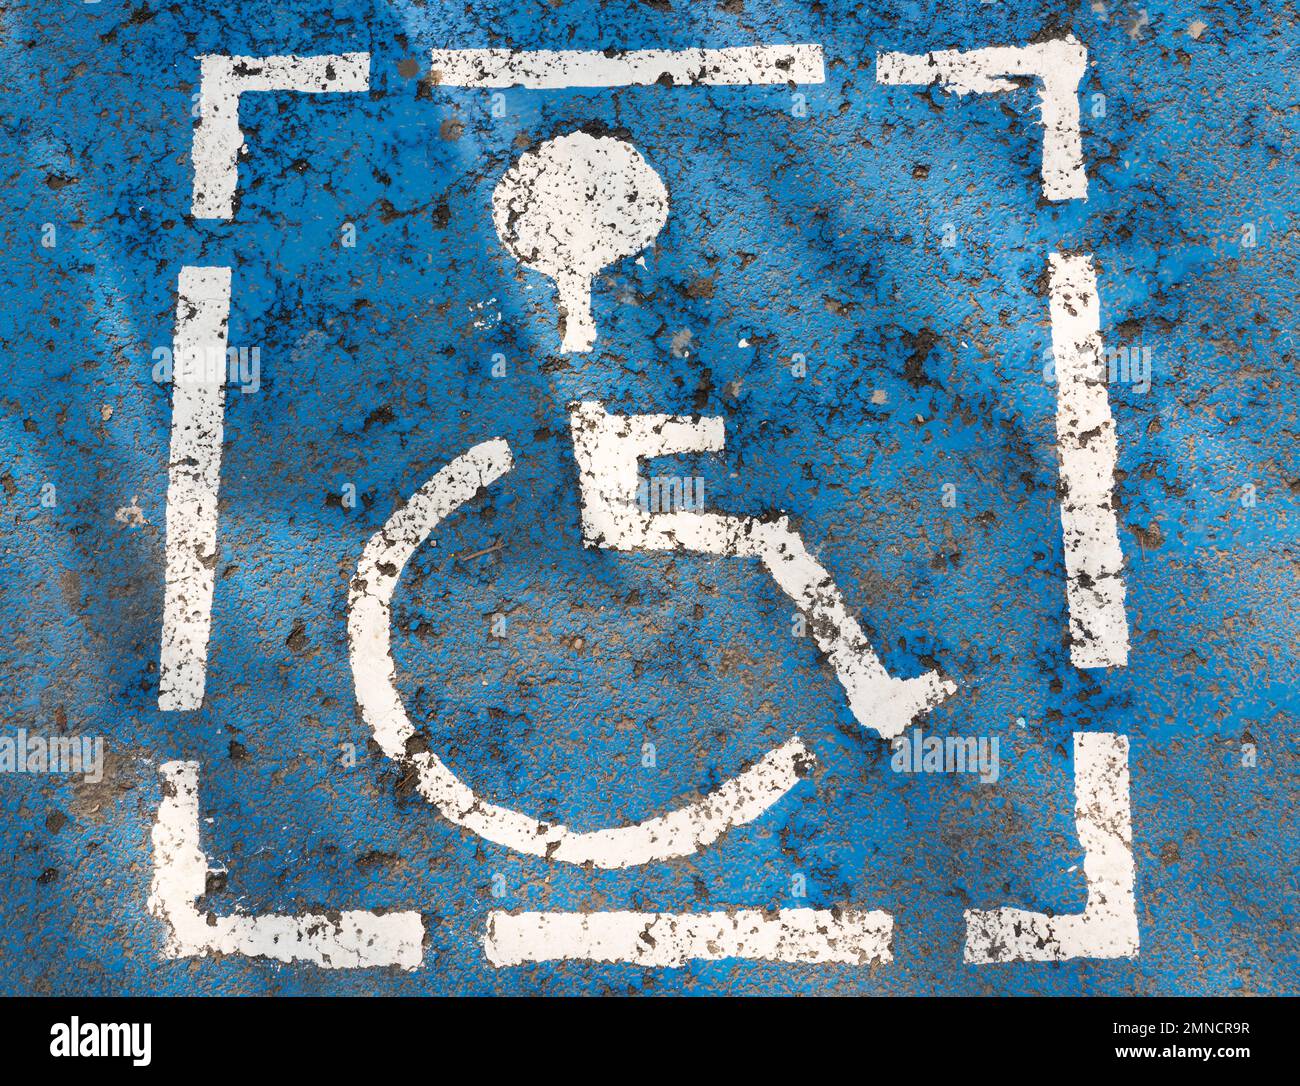 Close-up of priority parking spot for people with disabilities Stock Photo